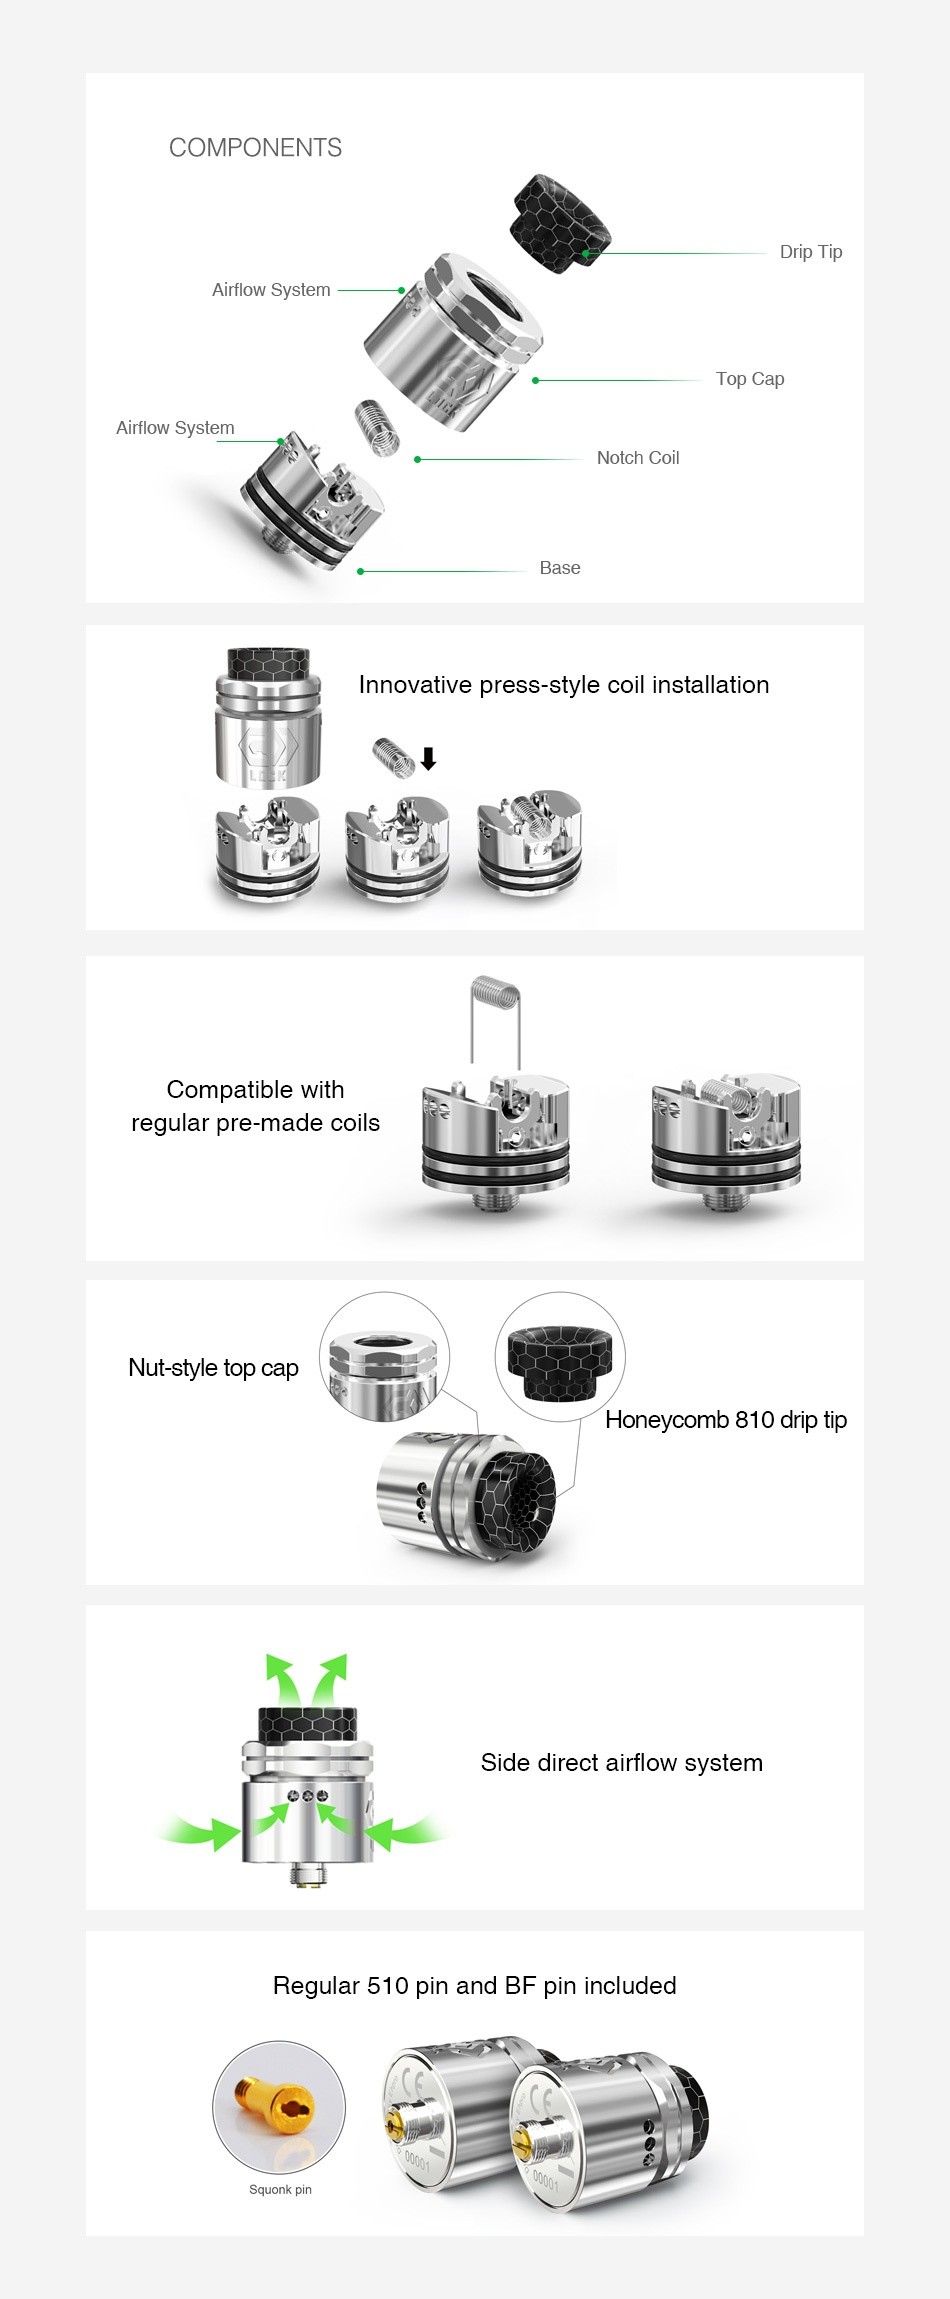 Ehpro Lock Build-free RDA COMPONENTS Drip Ti Airflow System TOD G AIrflow System Notch coil Base Innovative press style coil installation Compatible with regular pre  made coils Nut style top cap Honeycomb 810 drip tip Side direct airflow system Regular 510 pin and BF pin included